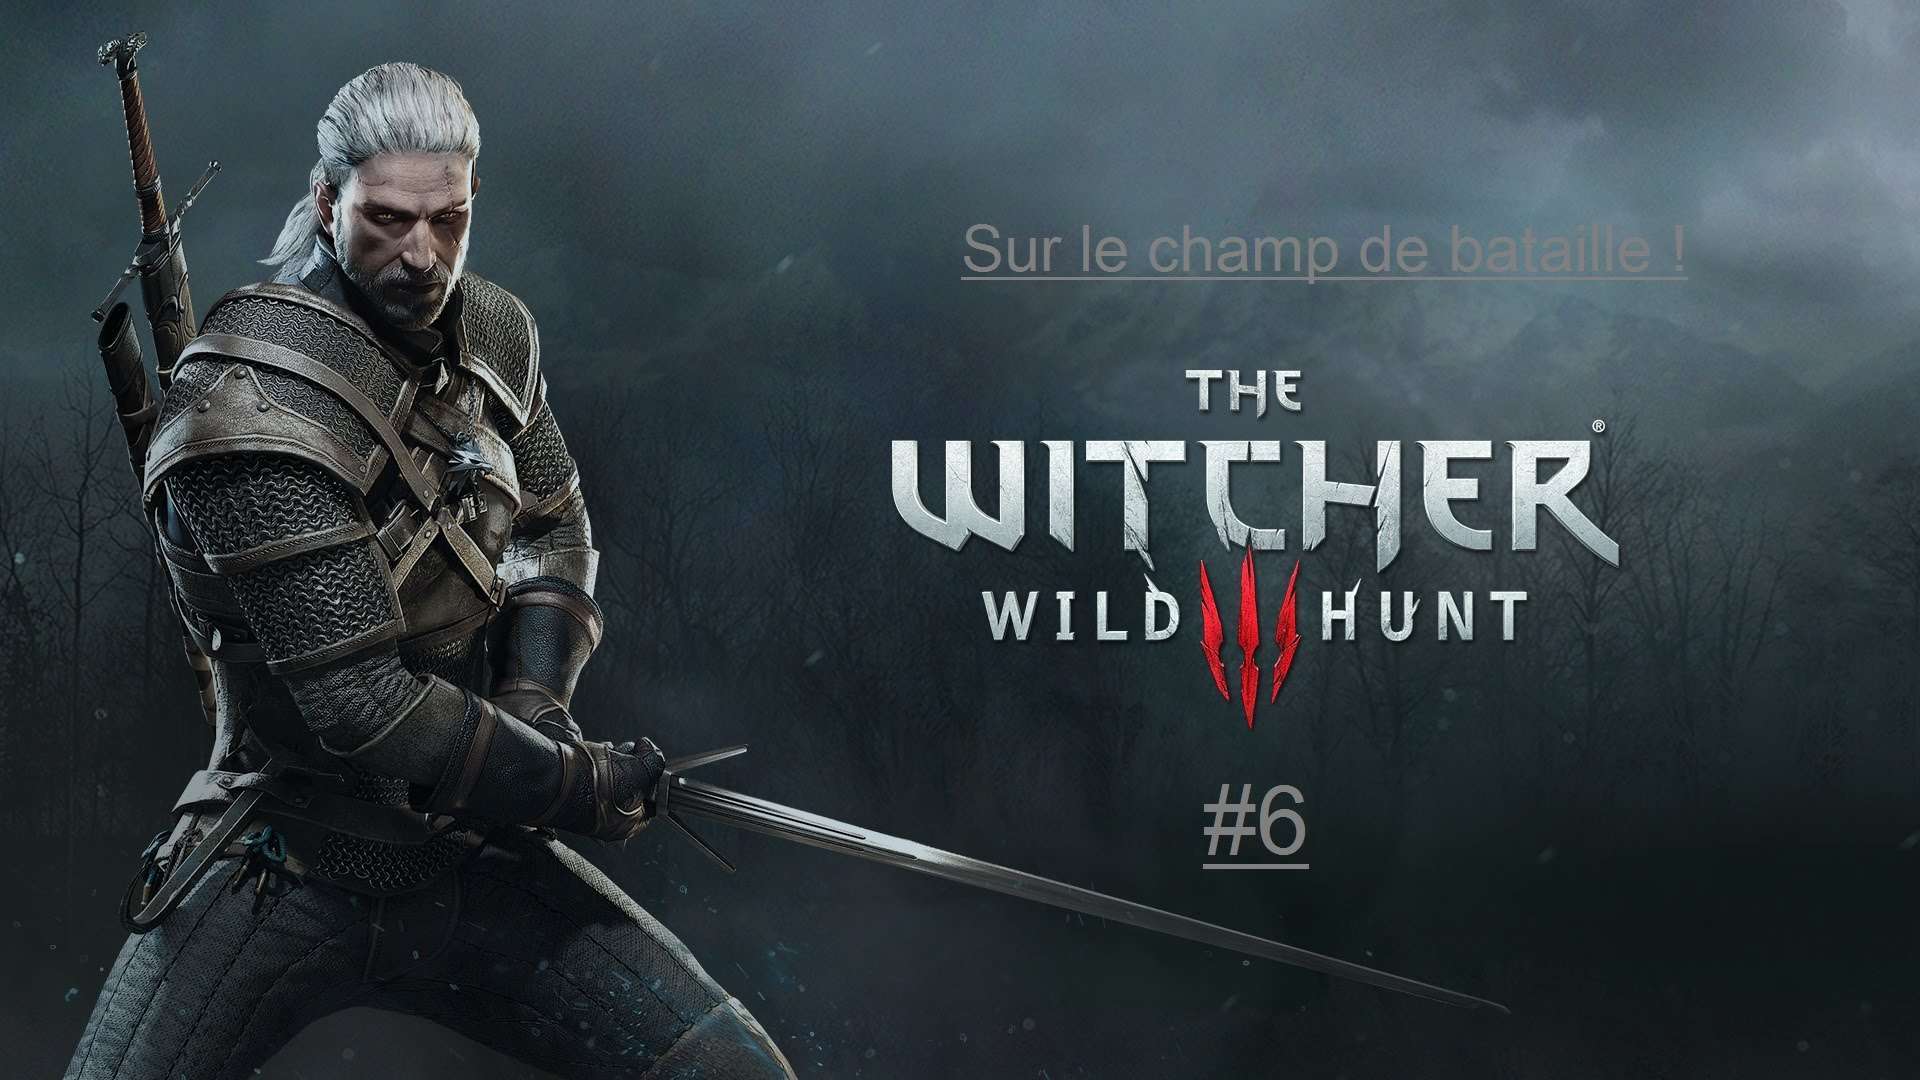 Wallpaper The Witcher Background 1080p Upload At August By